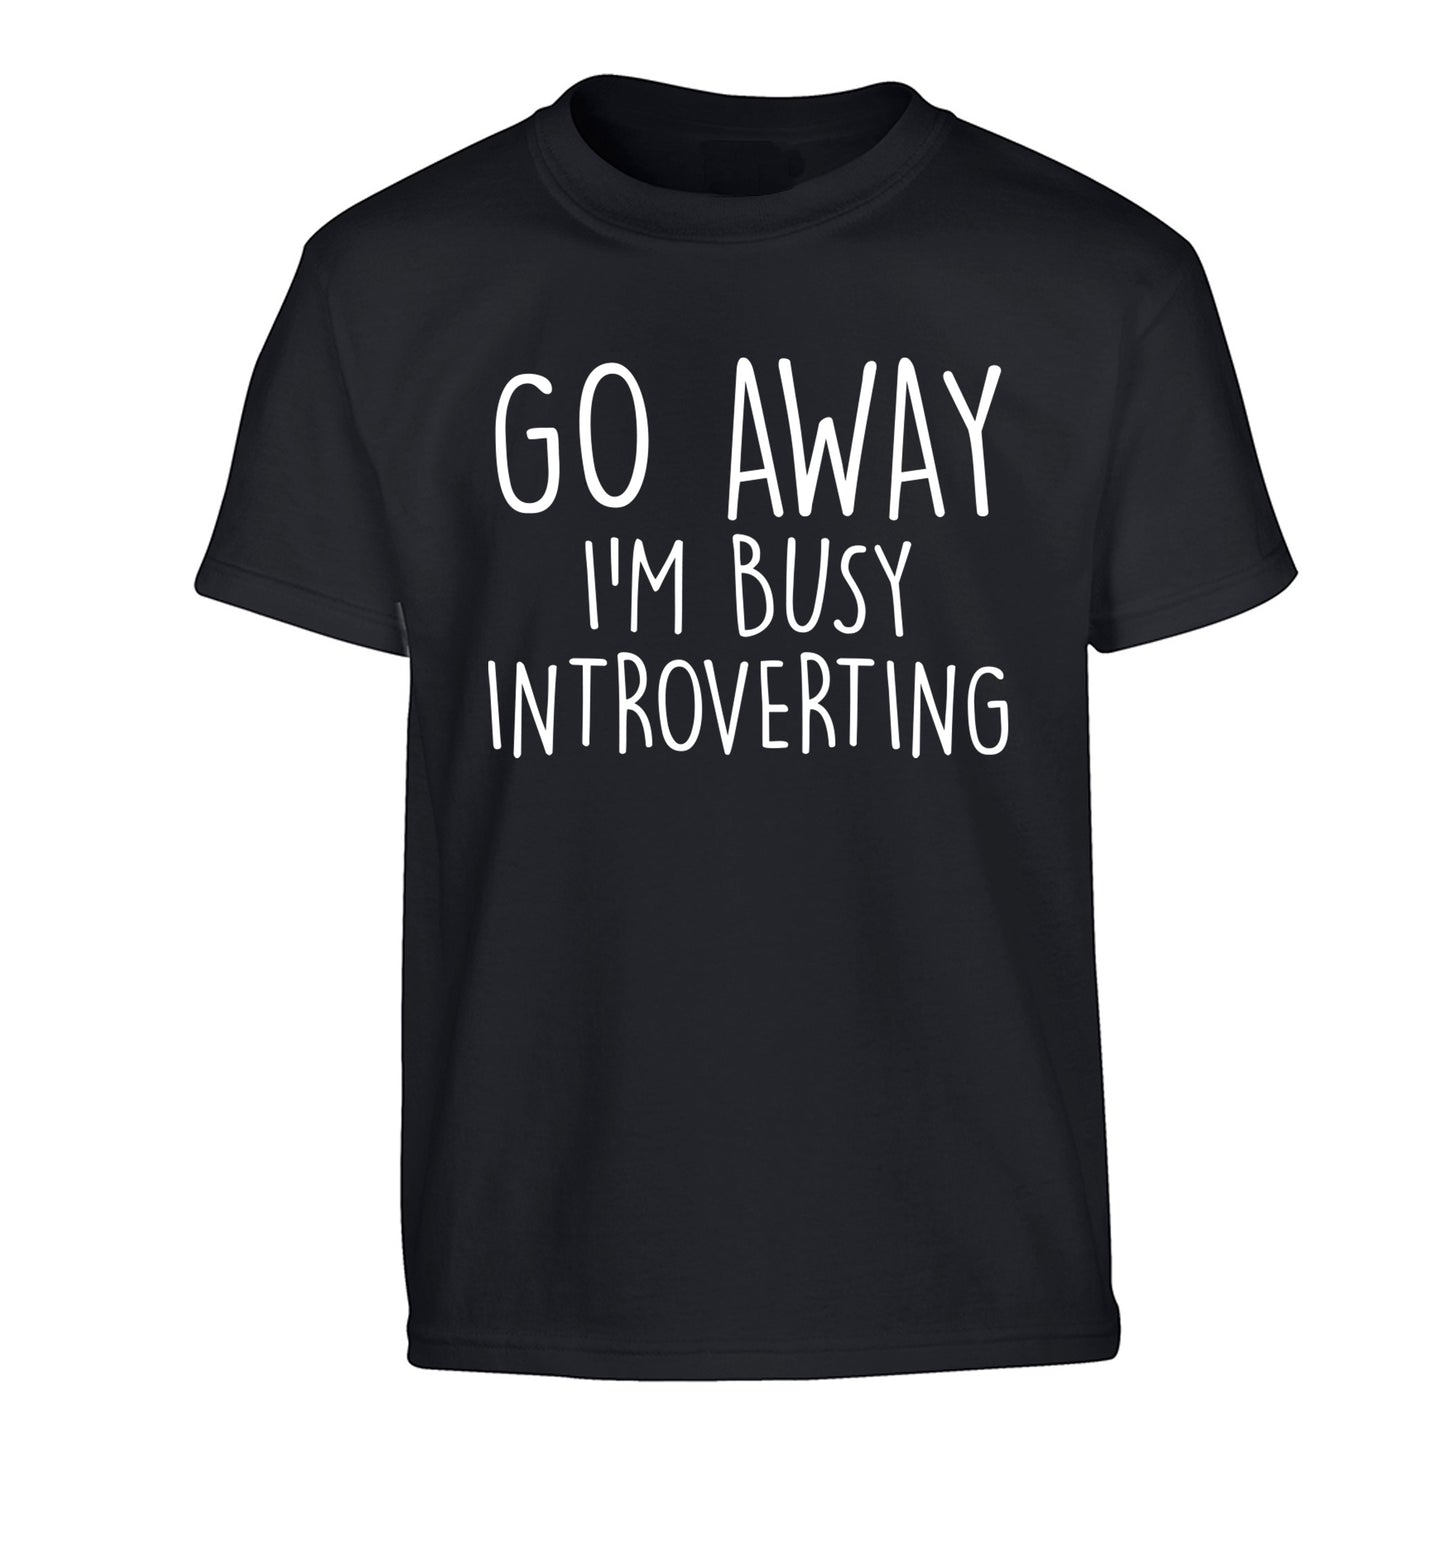 Go away I'm busy introverting Children's black Tshirt 12-13 Years